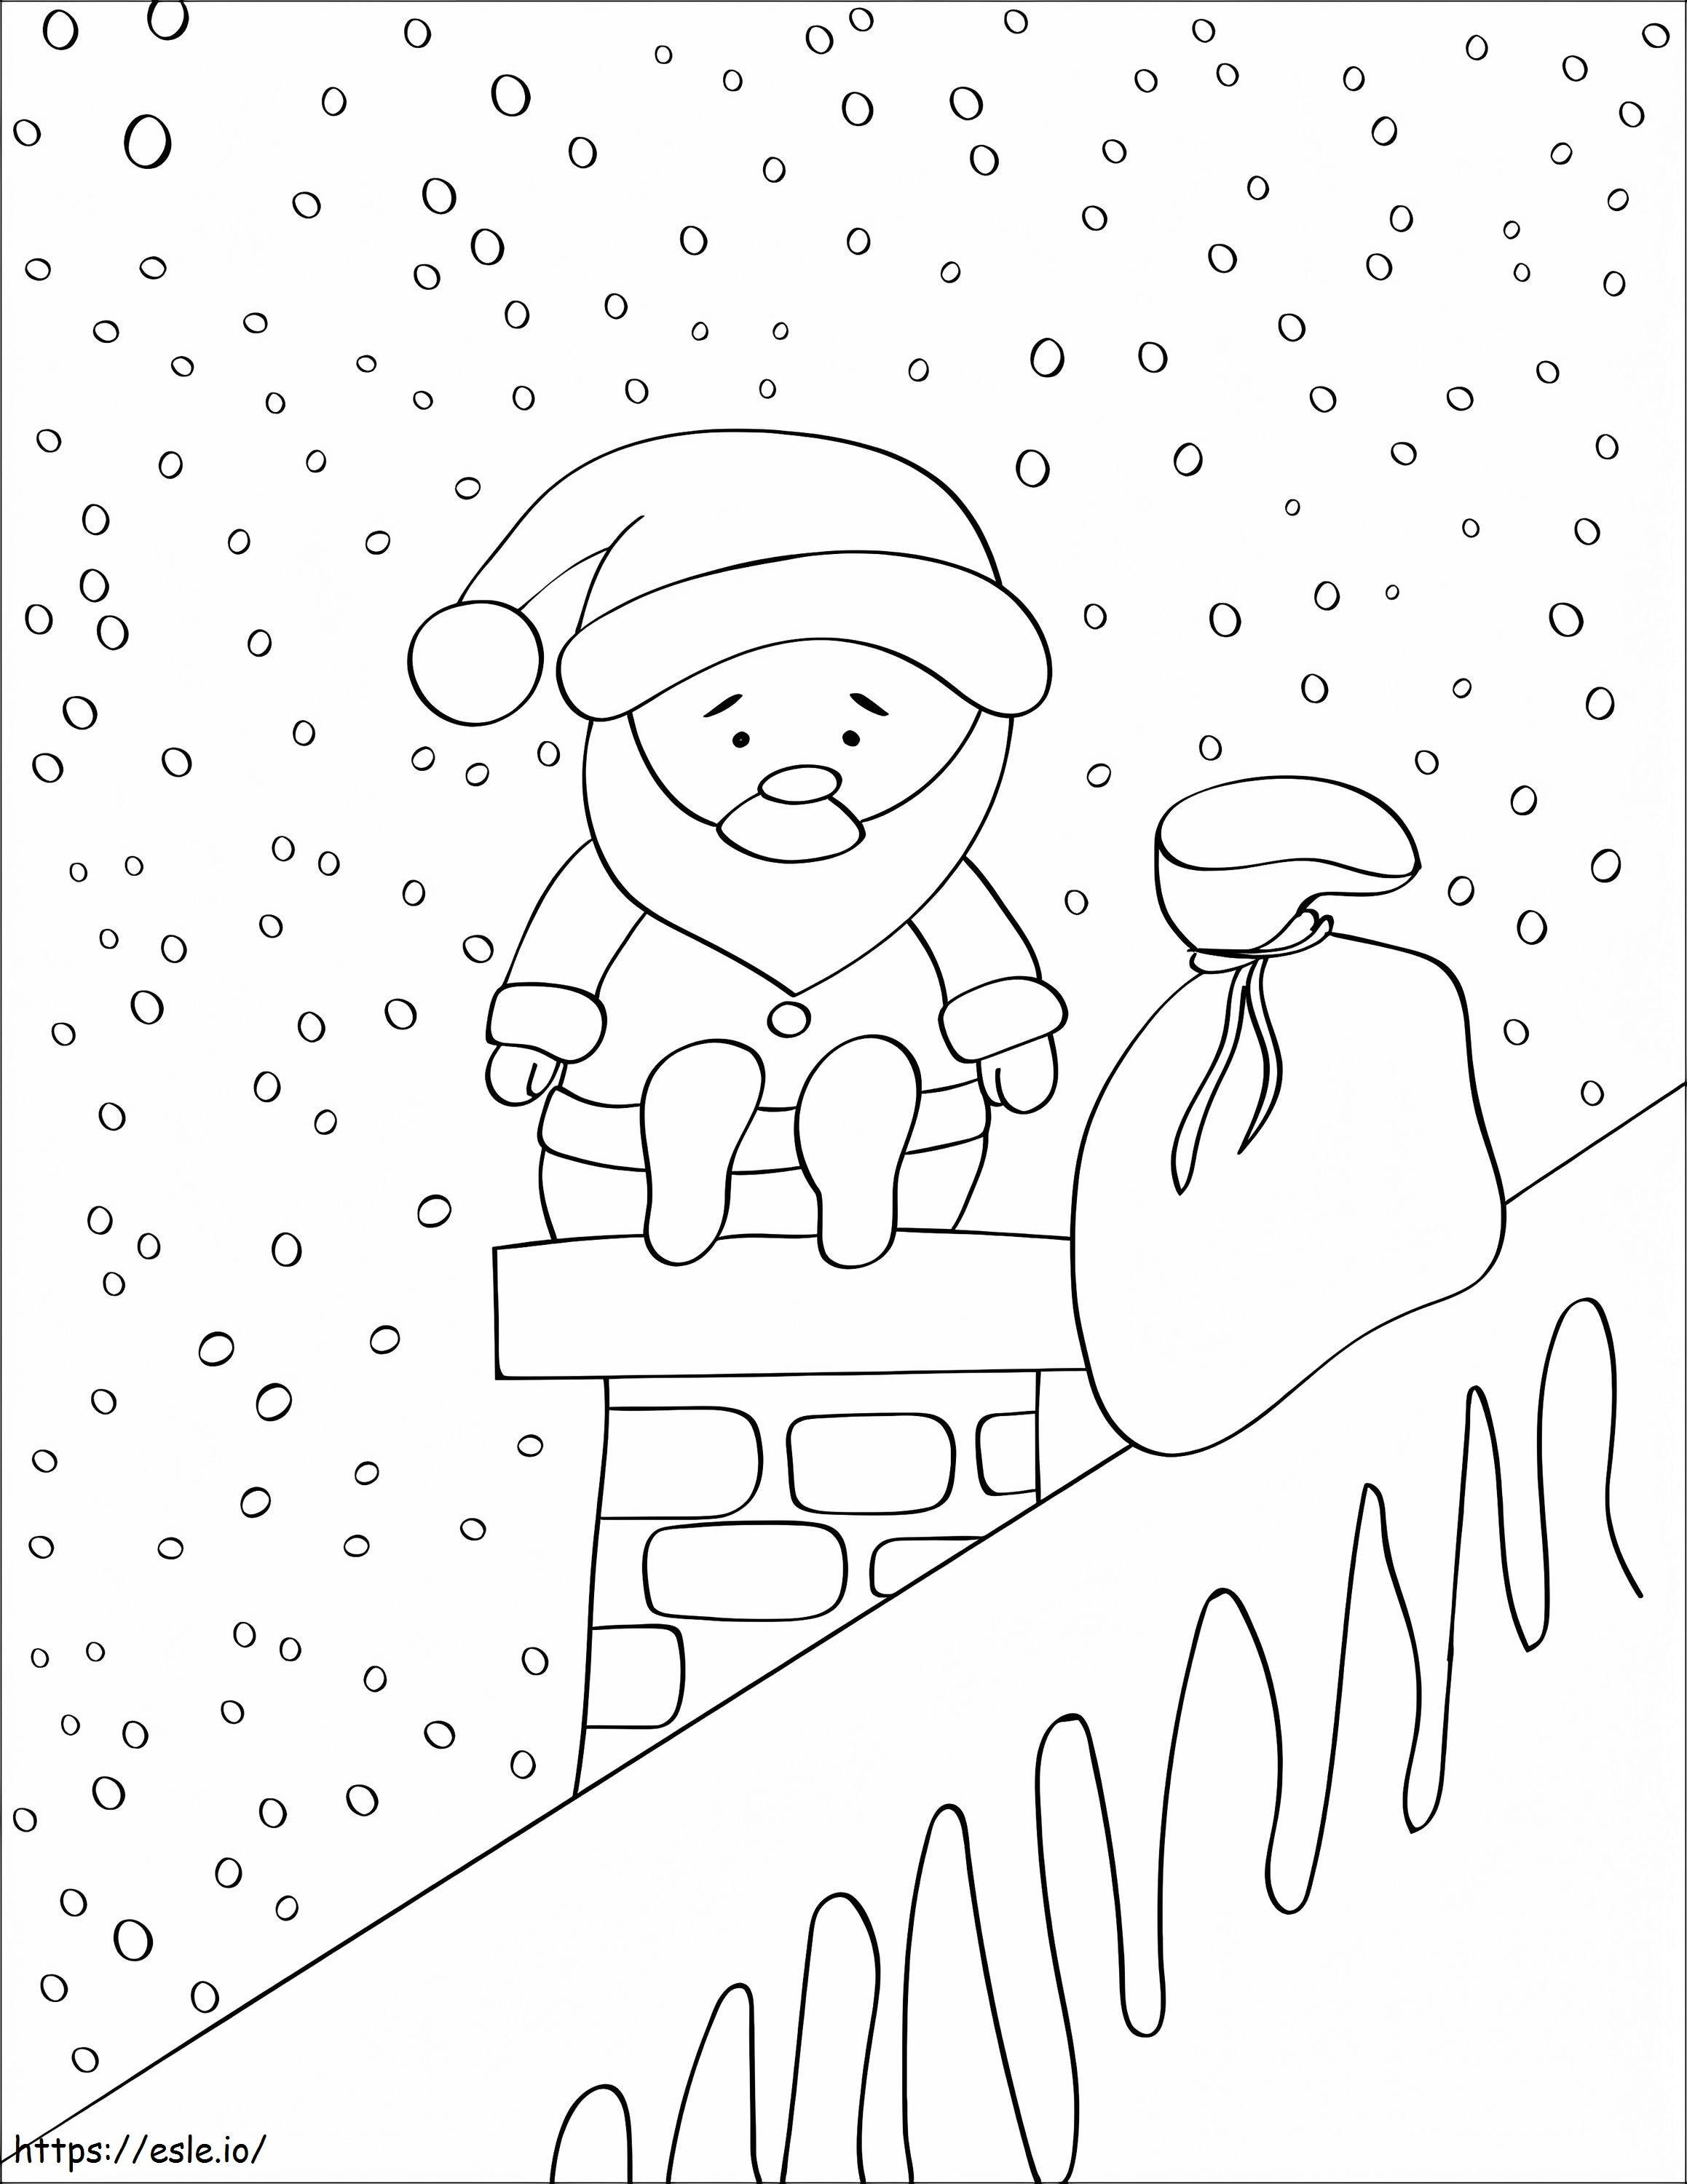 Santa Sitting On The Roof Of A House coloring page